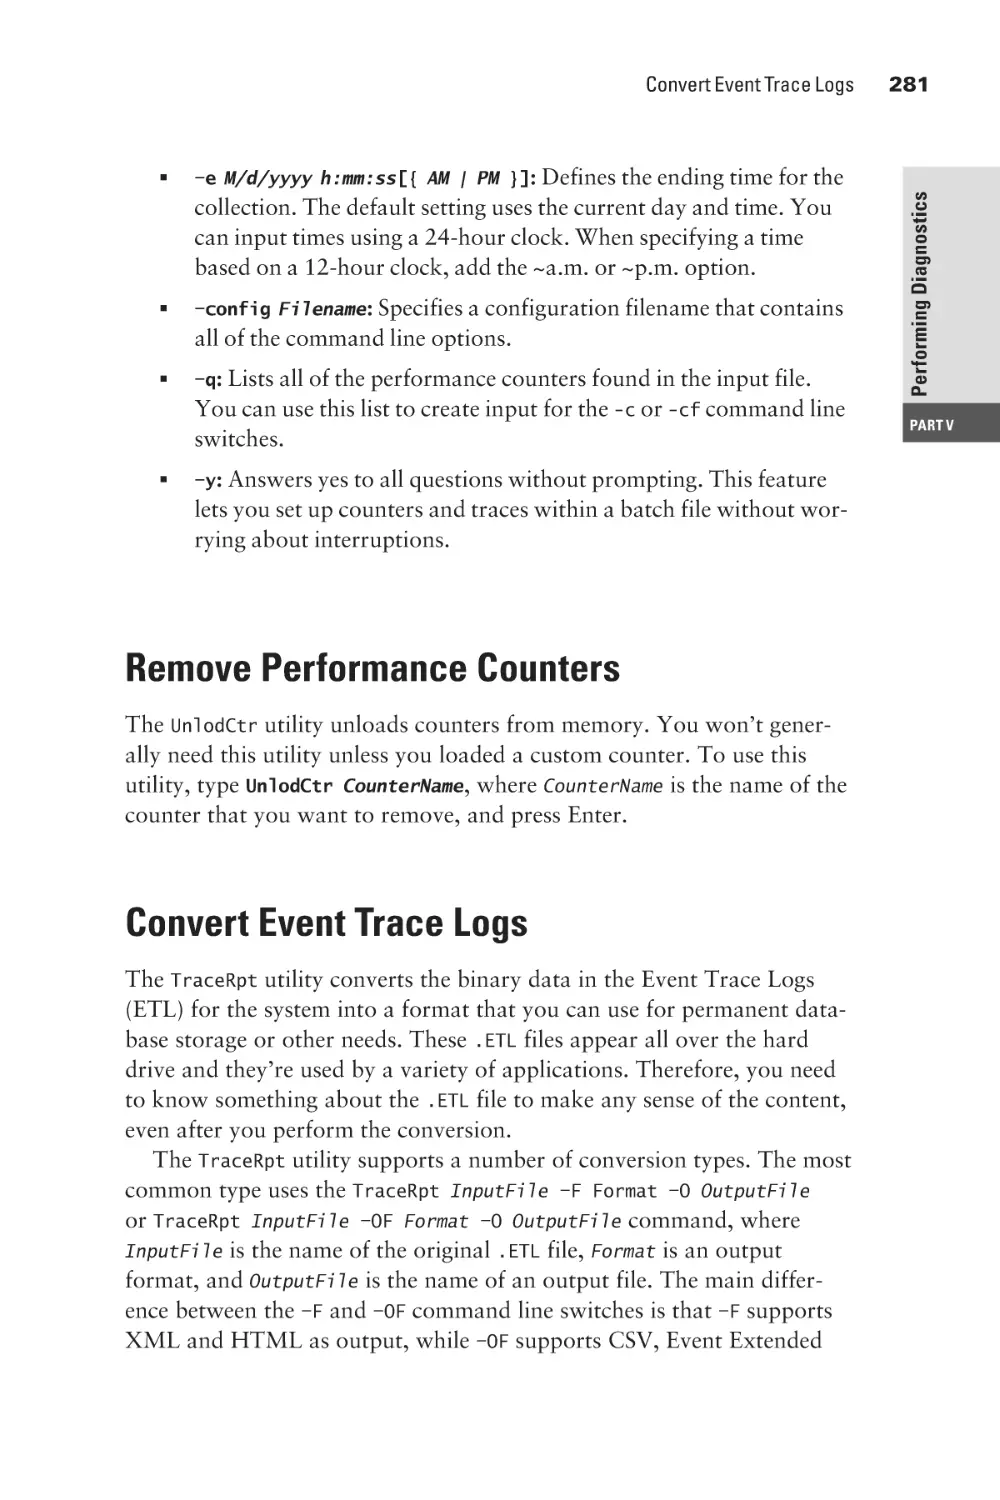 Remove Performance Counters
Convert Event Trace Logs